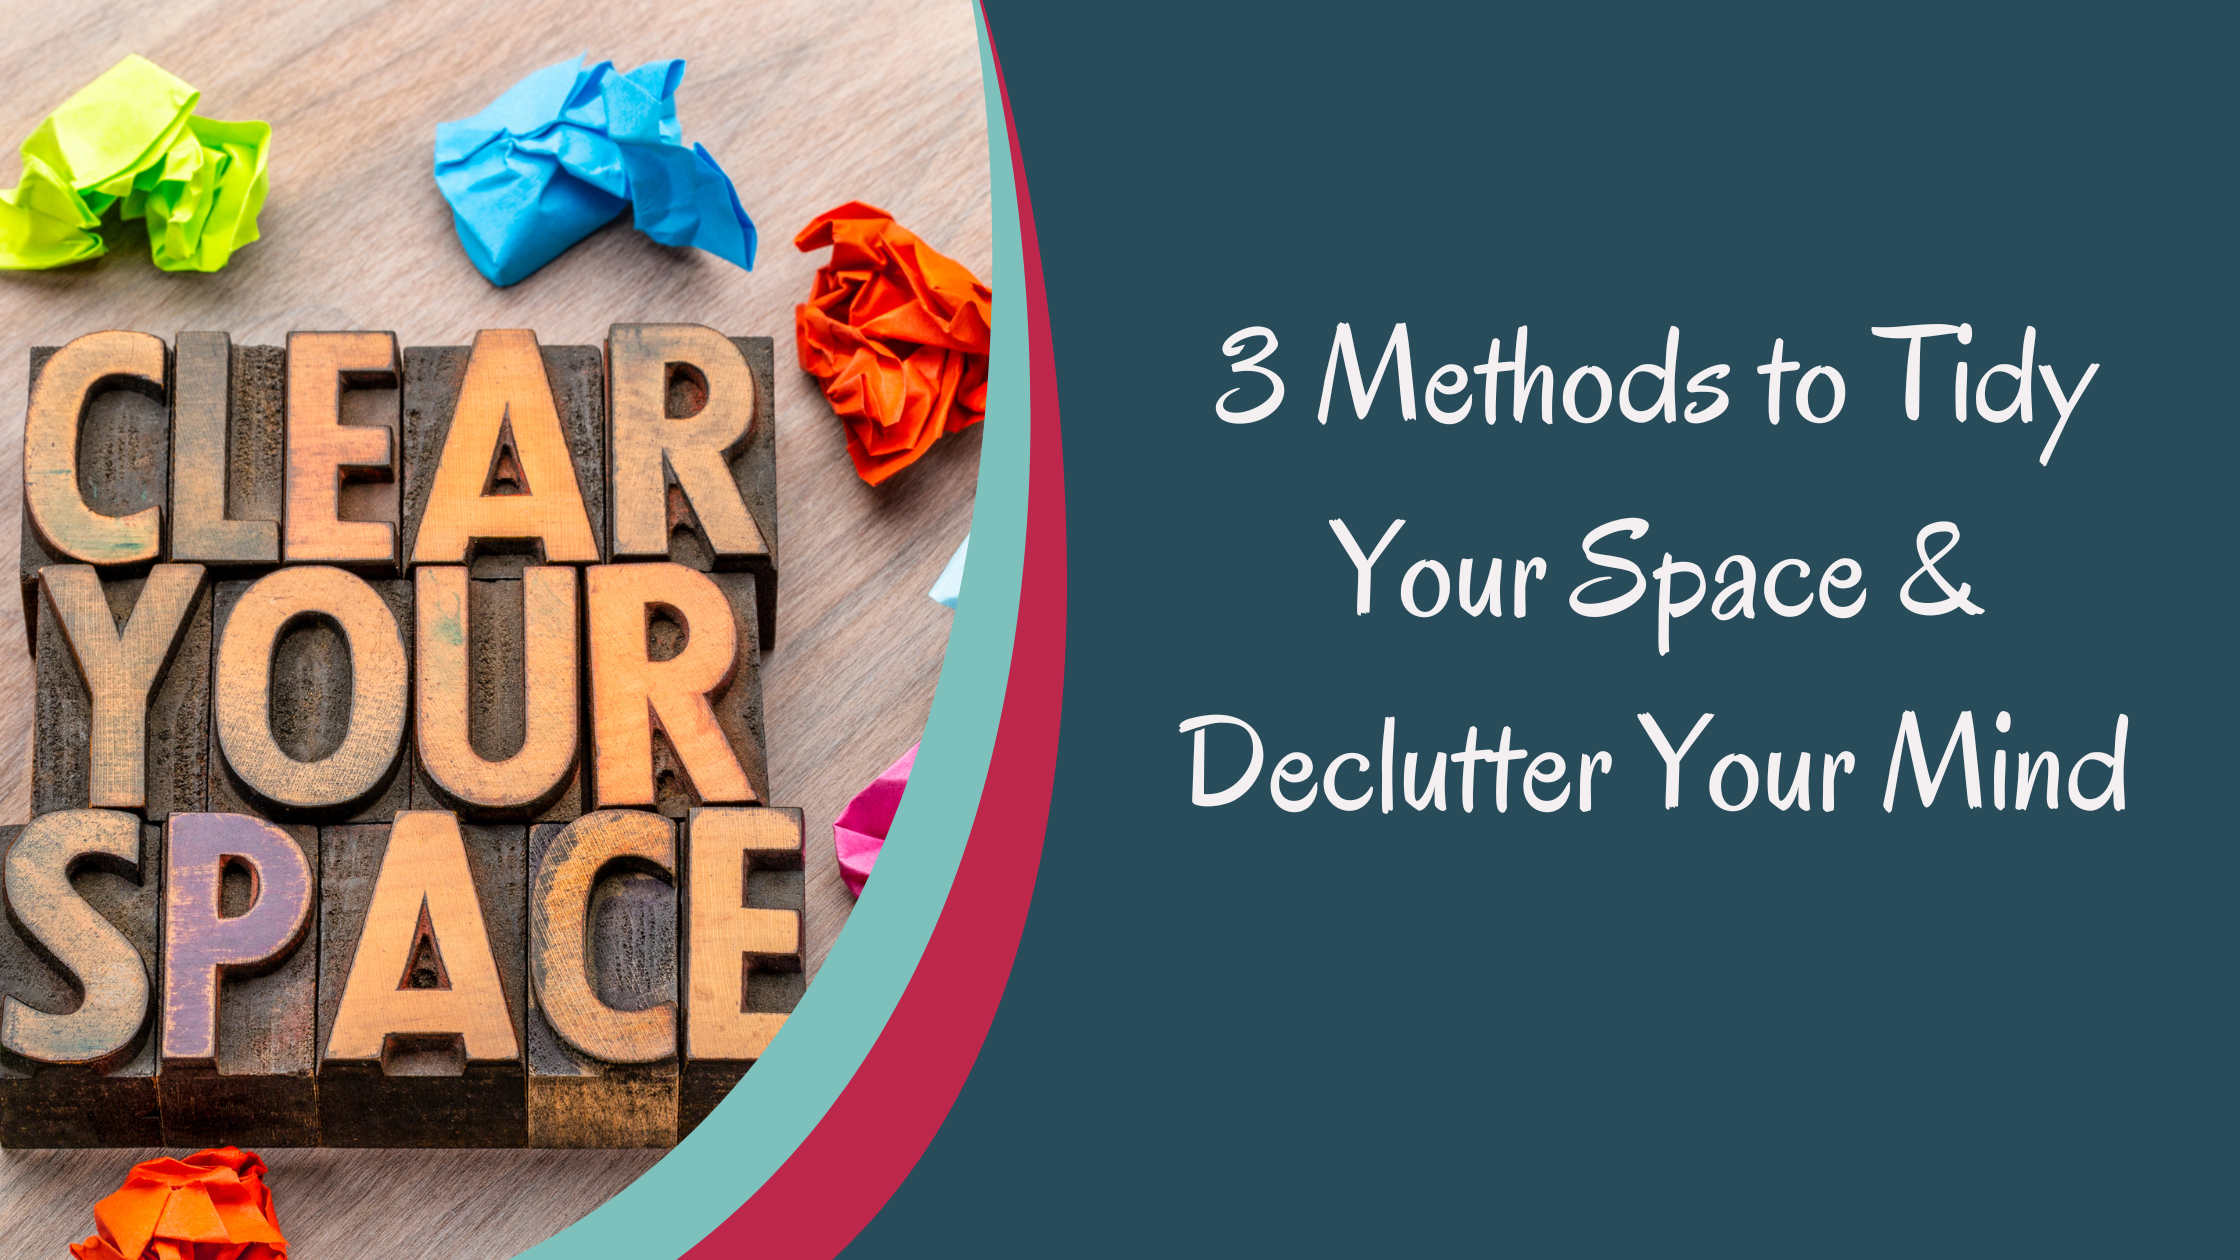 3 Methods for Tidying Up